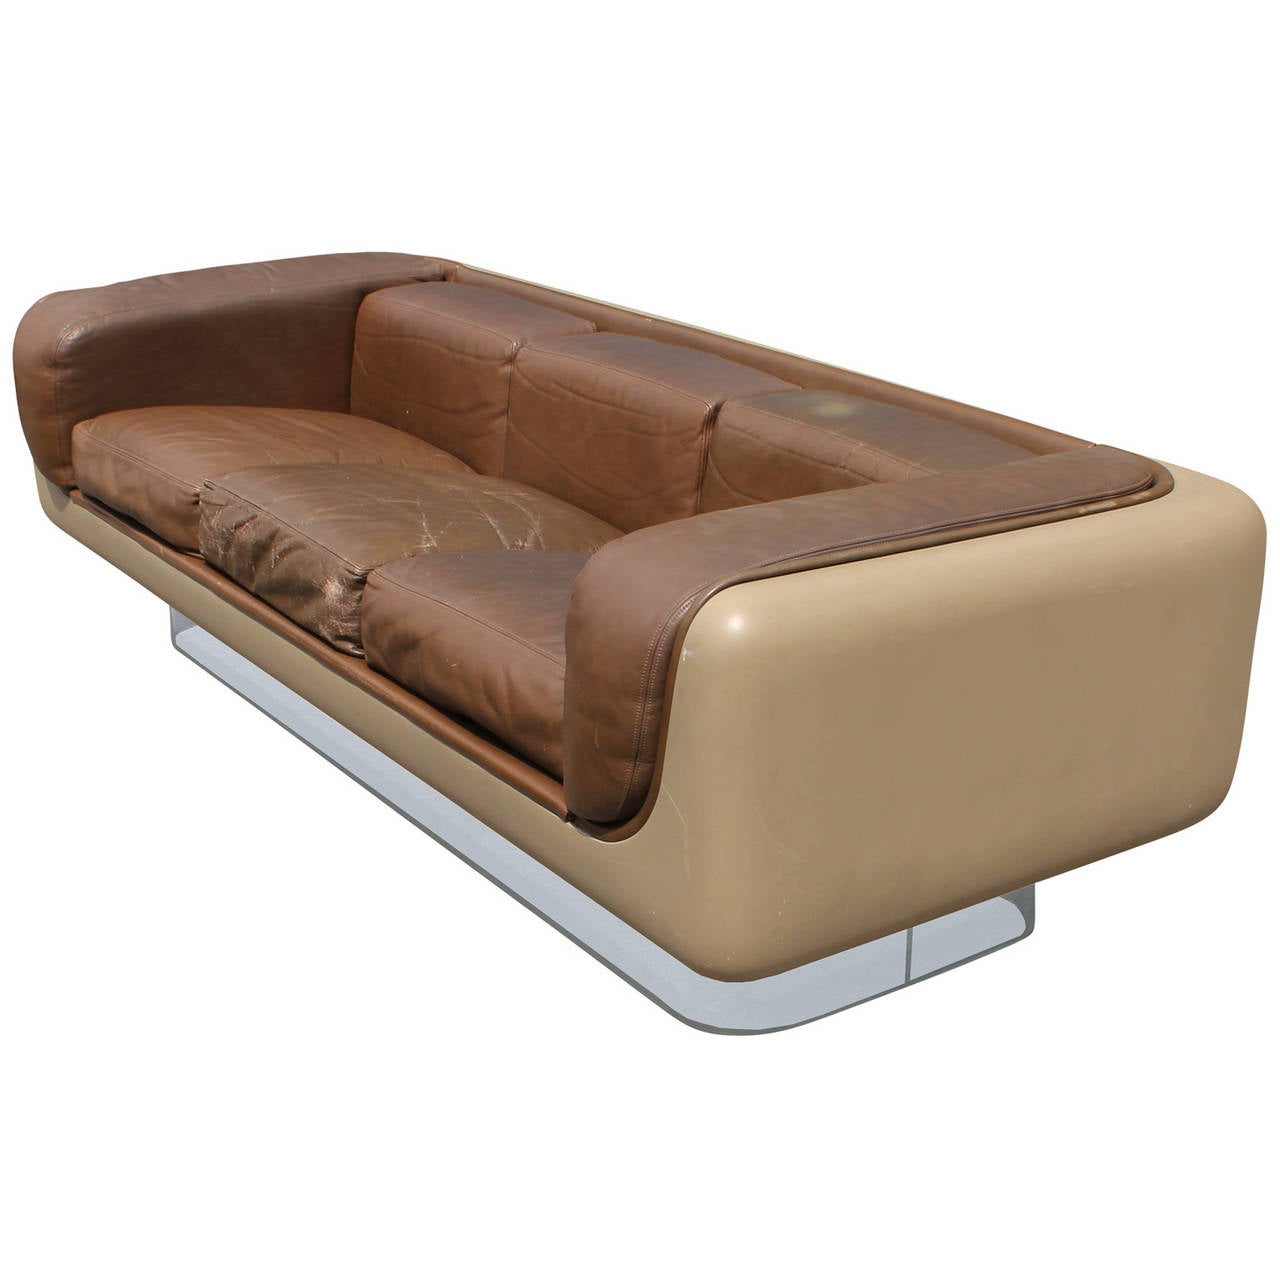 Pair of wonderful fiberglass sofas designed by William C. Andrus for Steelcase. Sofas are from the 465 Soft series designed in 1972. Sofas sit upon Lucite bases to create a floating look. Sofas are upholstered in the original brown leather. Leather